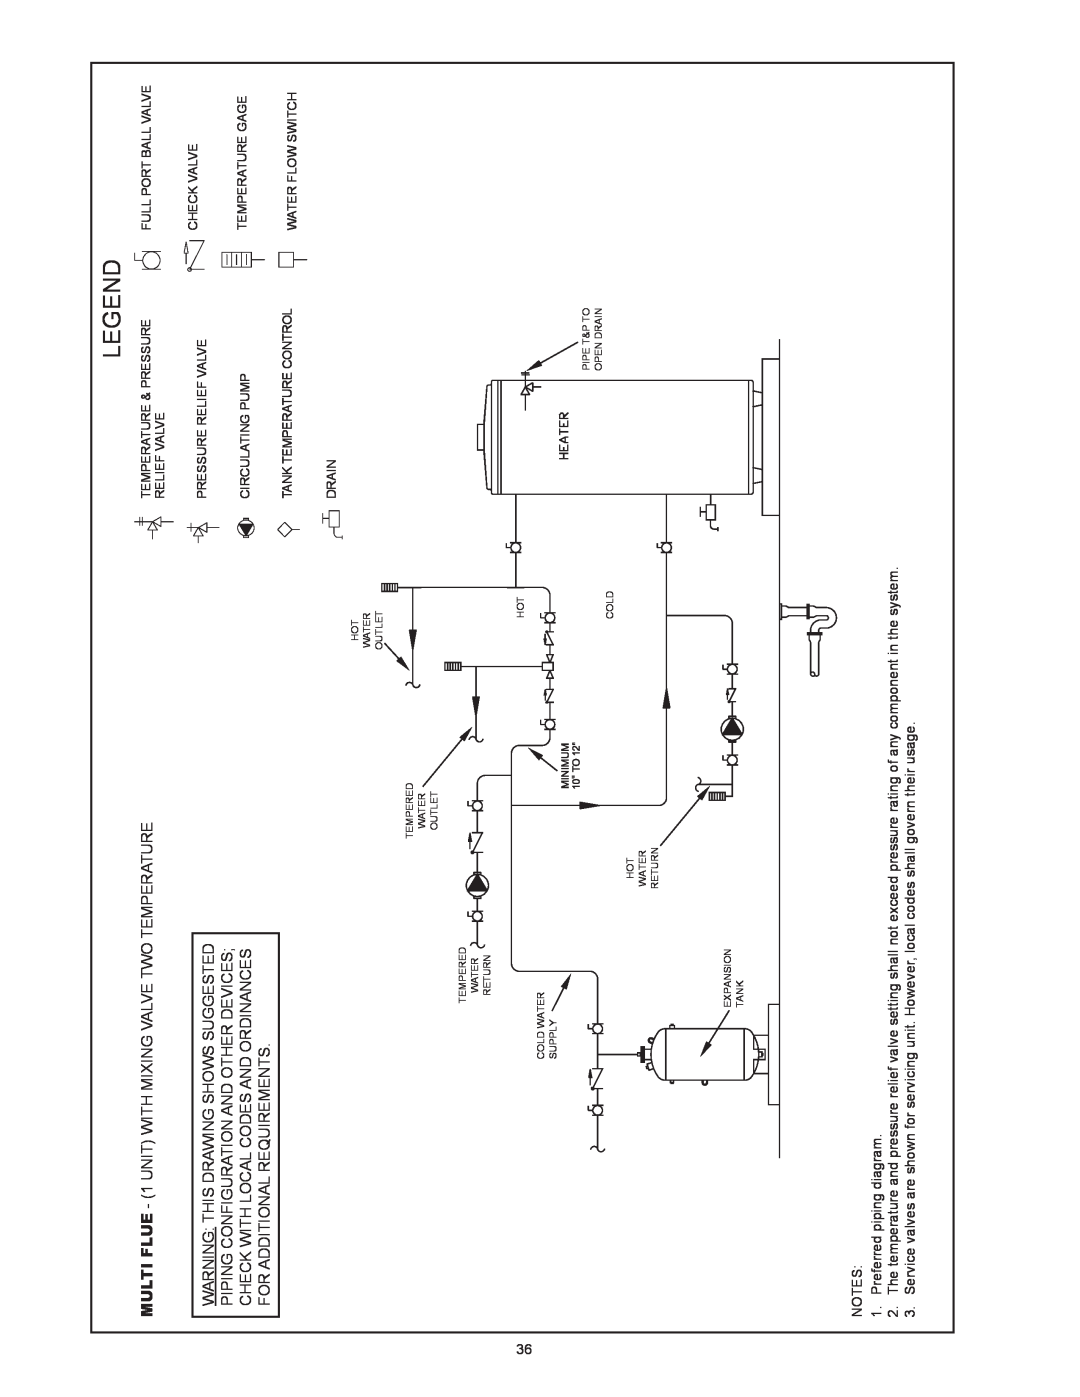 State Industries SBD85500NE MULTI FLUE - 1 UNIT WITH MIXING VALVE TWO TEMPERATURE, Warning This Drawing Shows Suggested 